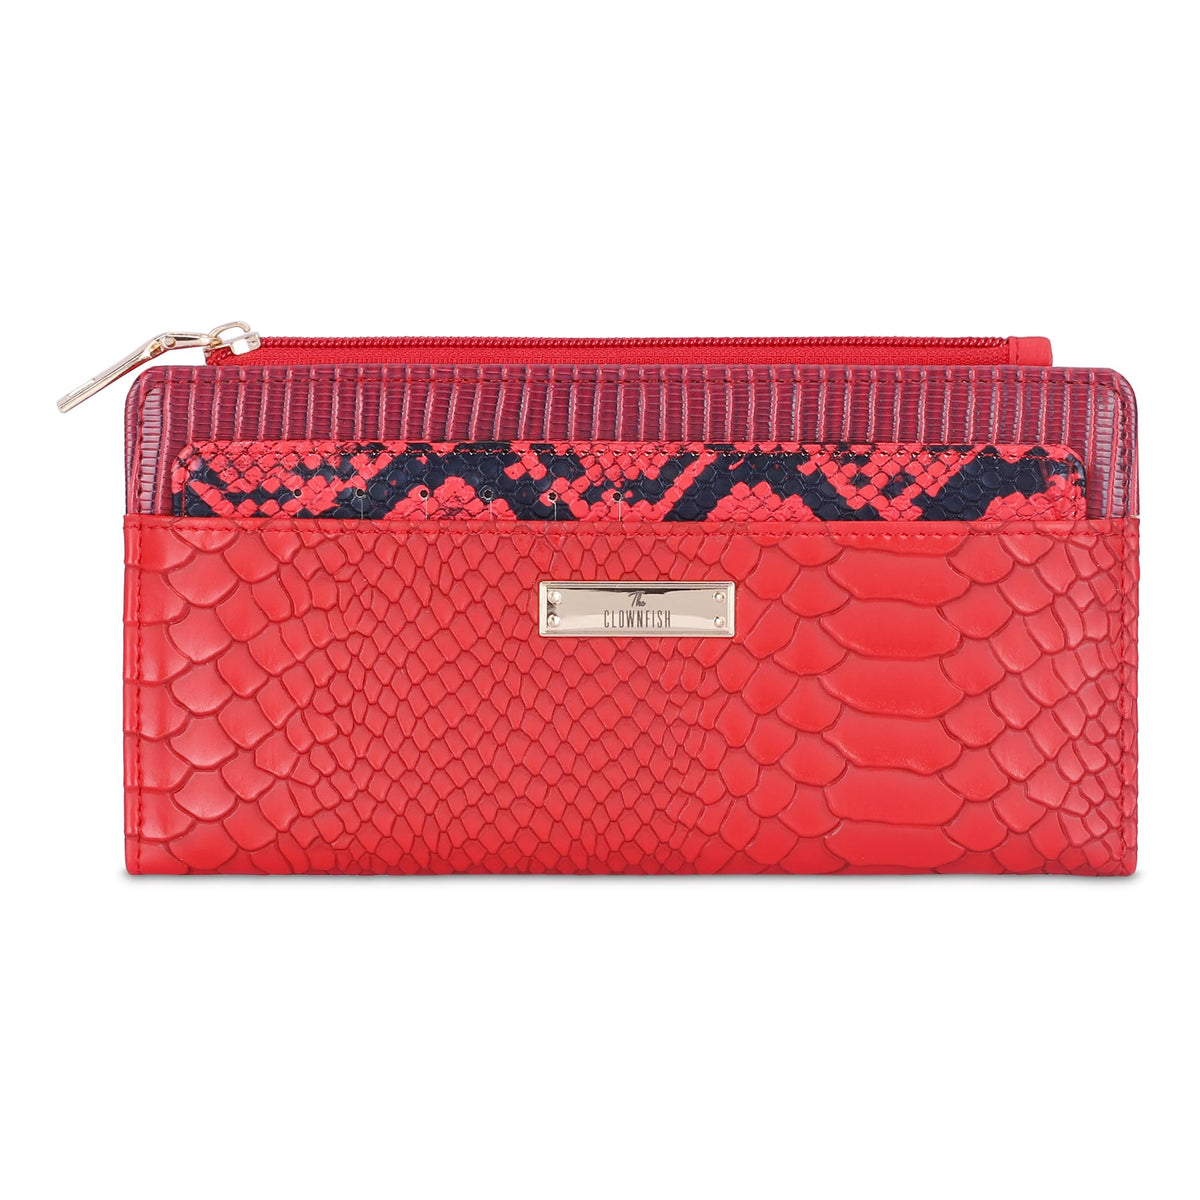 THE CLOWNFISH Prospera Collection Crocodile Finish Faux Leather Bi-Fold Womens Wallet Clutch Ladies Purse with Separate Multiple Cards Holder (Crimson Red)